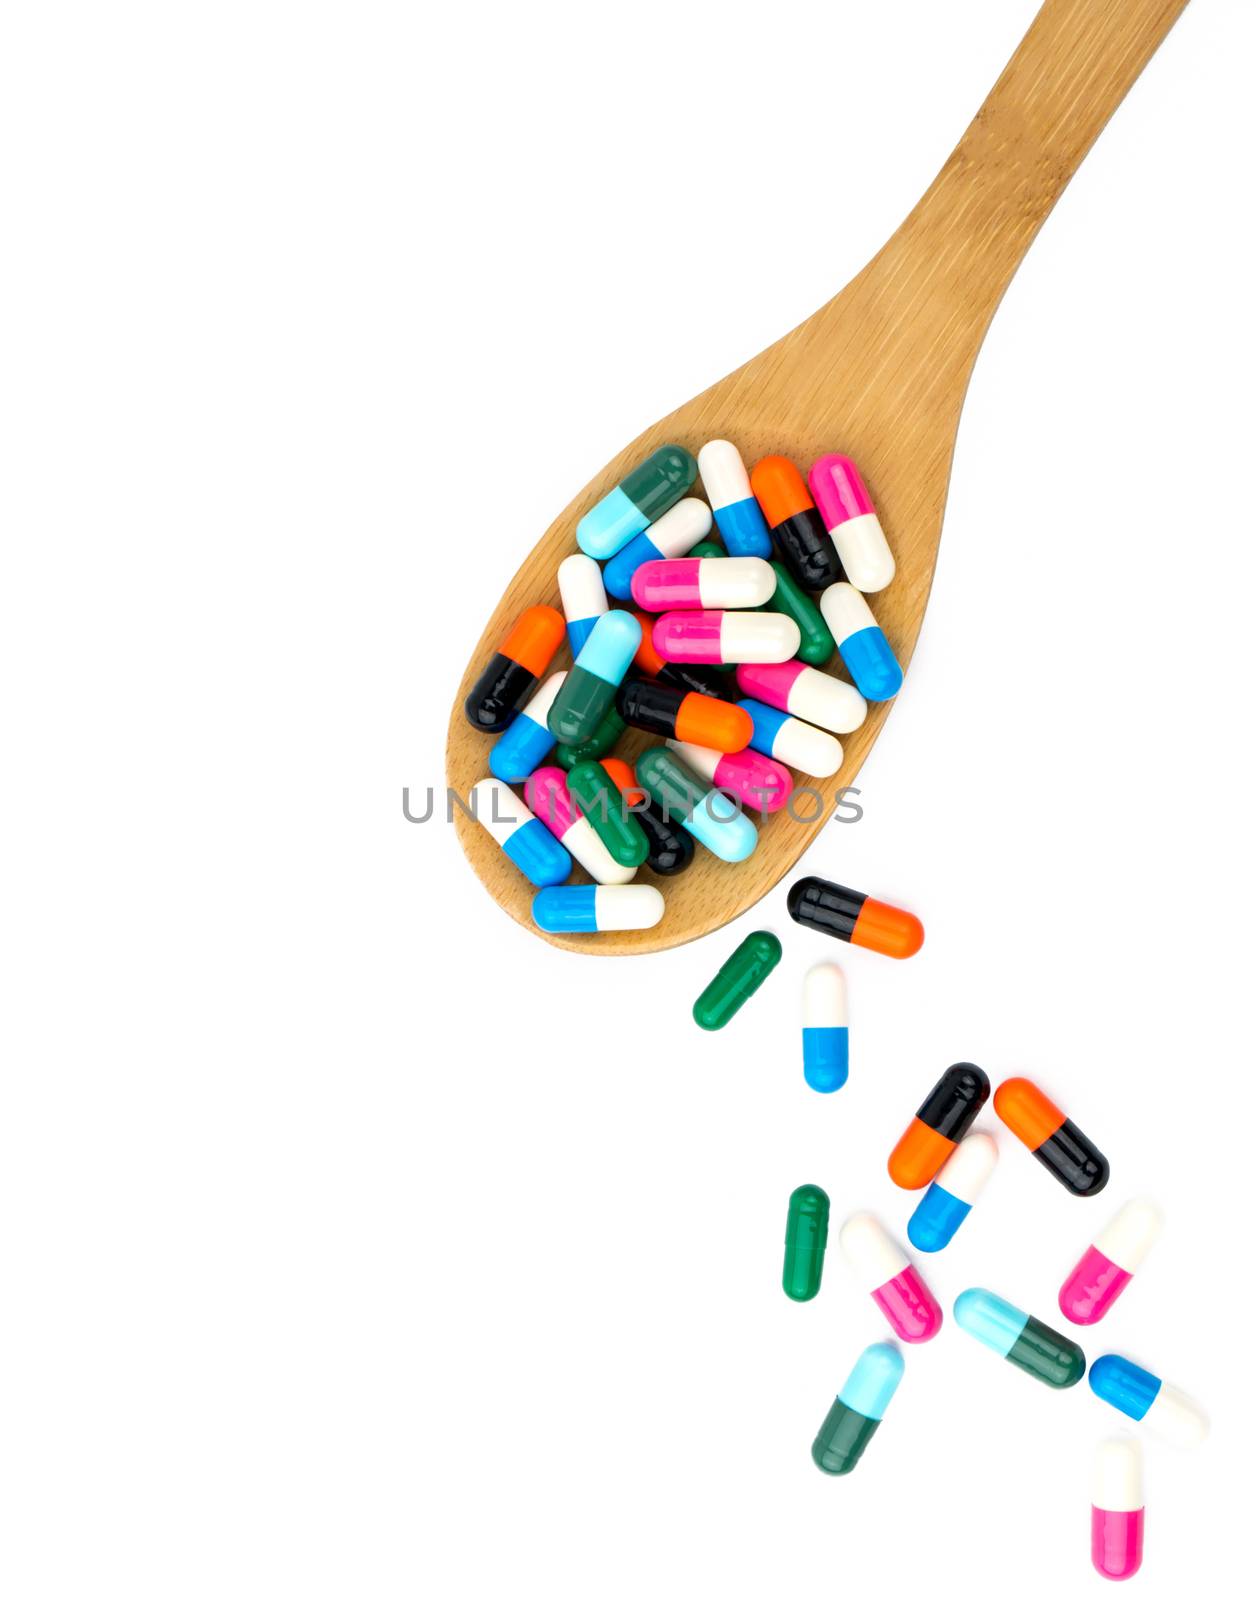 Colorful of antibiotics capsule pills in wooden spoon are spilling isolated on white background with copy space and clipping path. Antibiotic drug use with reasonable and health insurance concept. by Fahroni